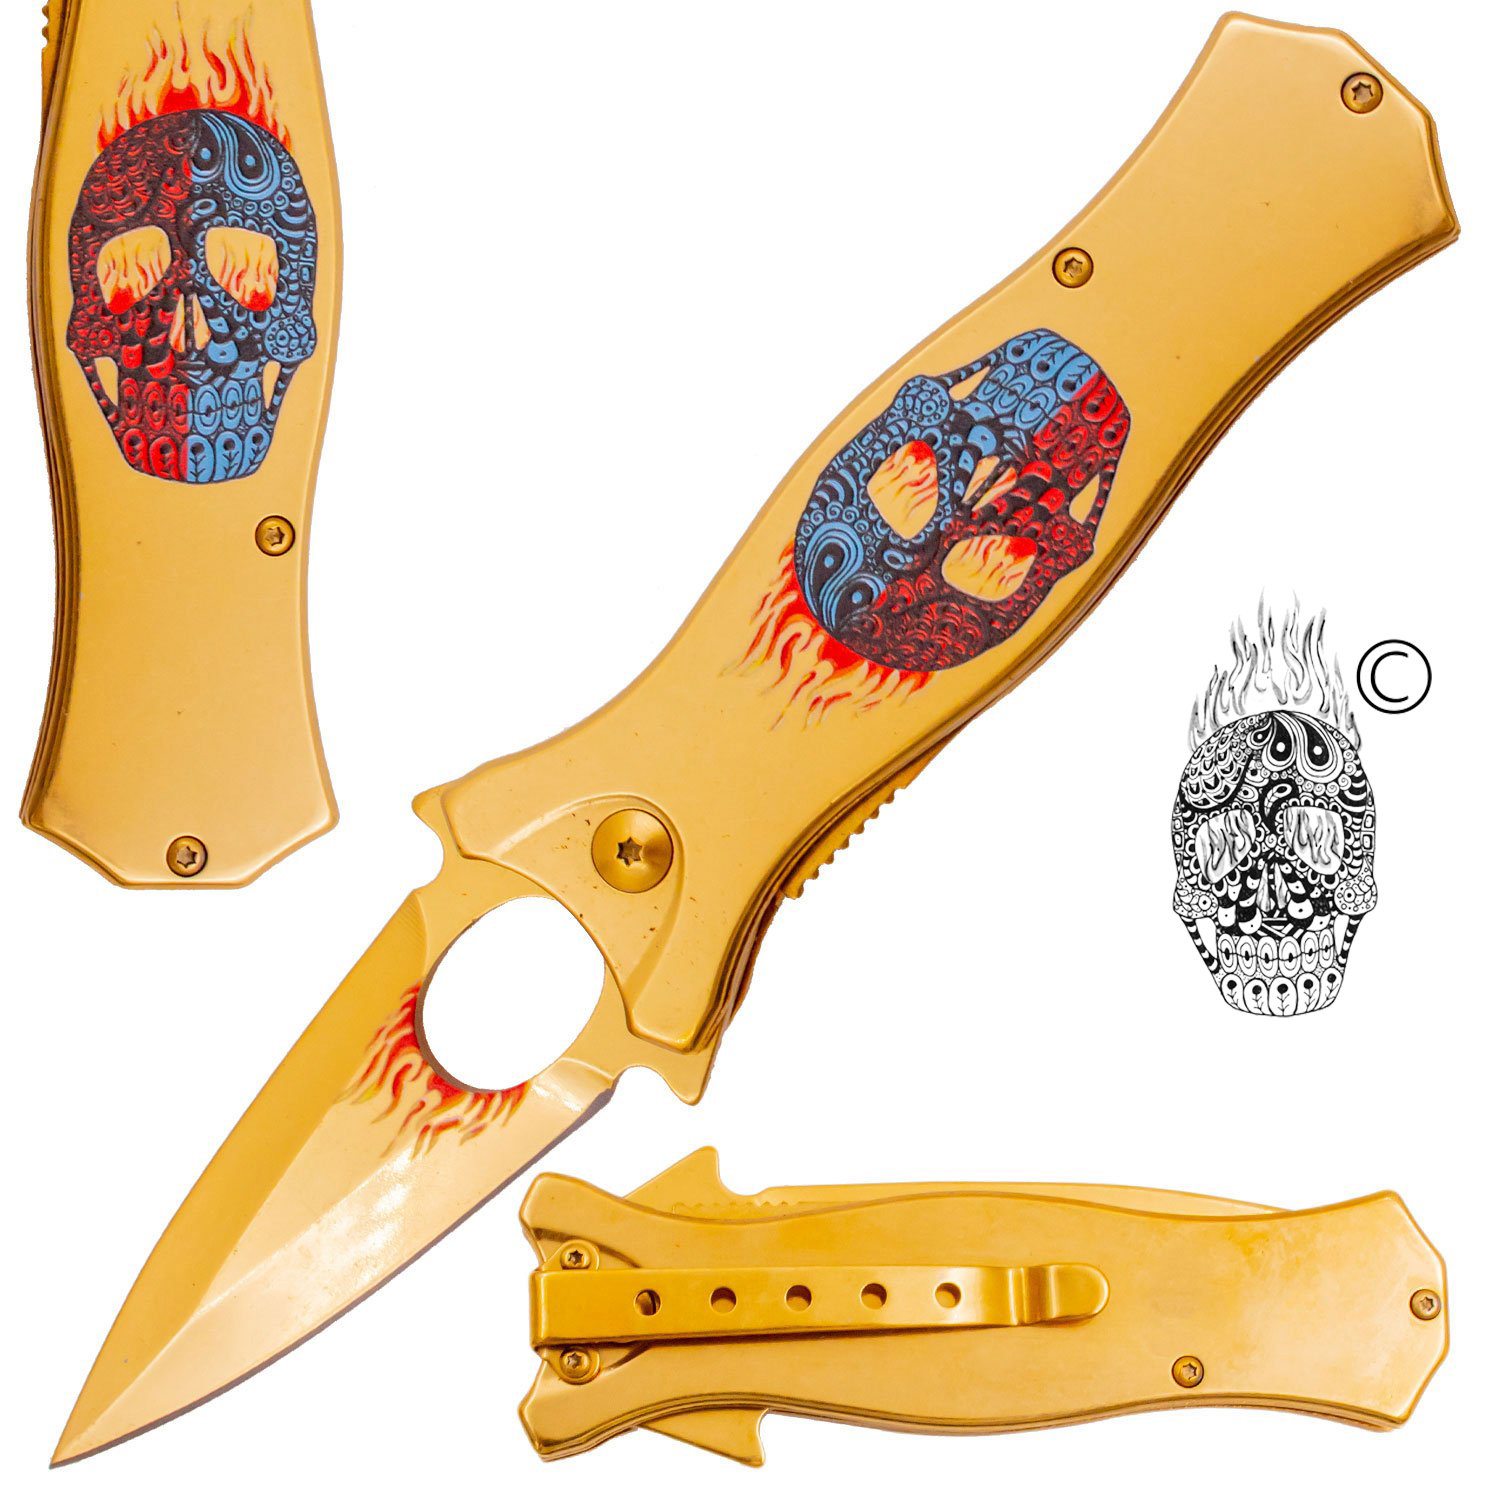 7.5 Inch Golden Ticket Spring Assisted Knife Flaming Sugar Skull (Red and Blue)